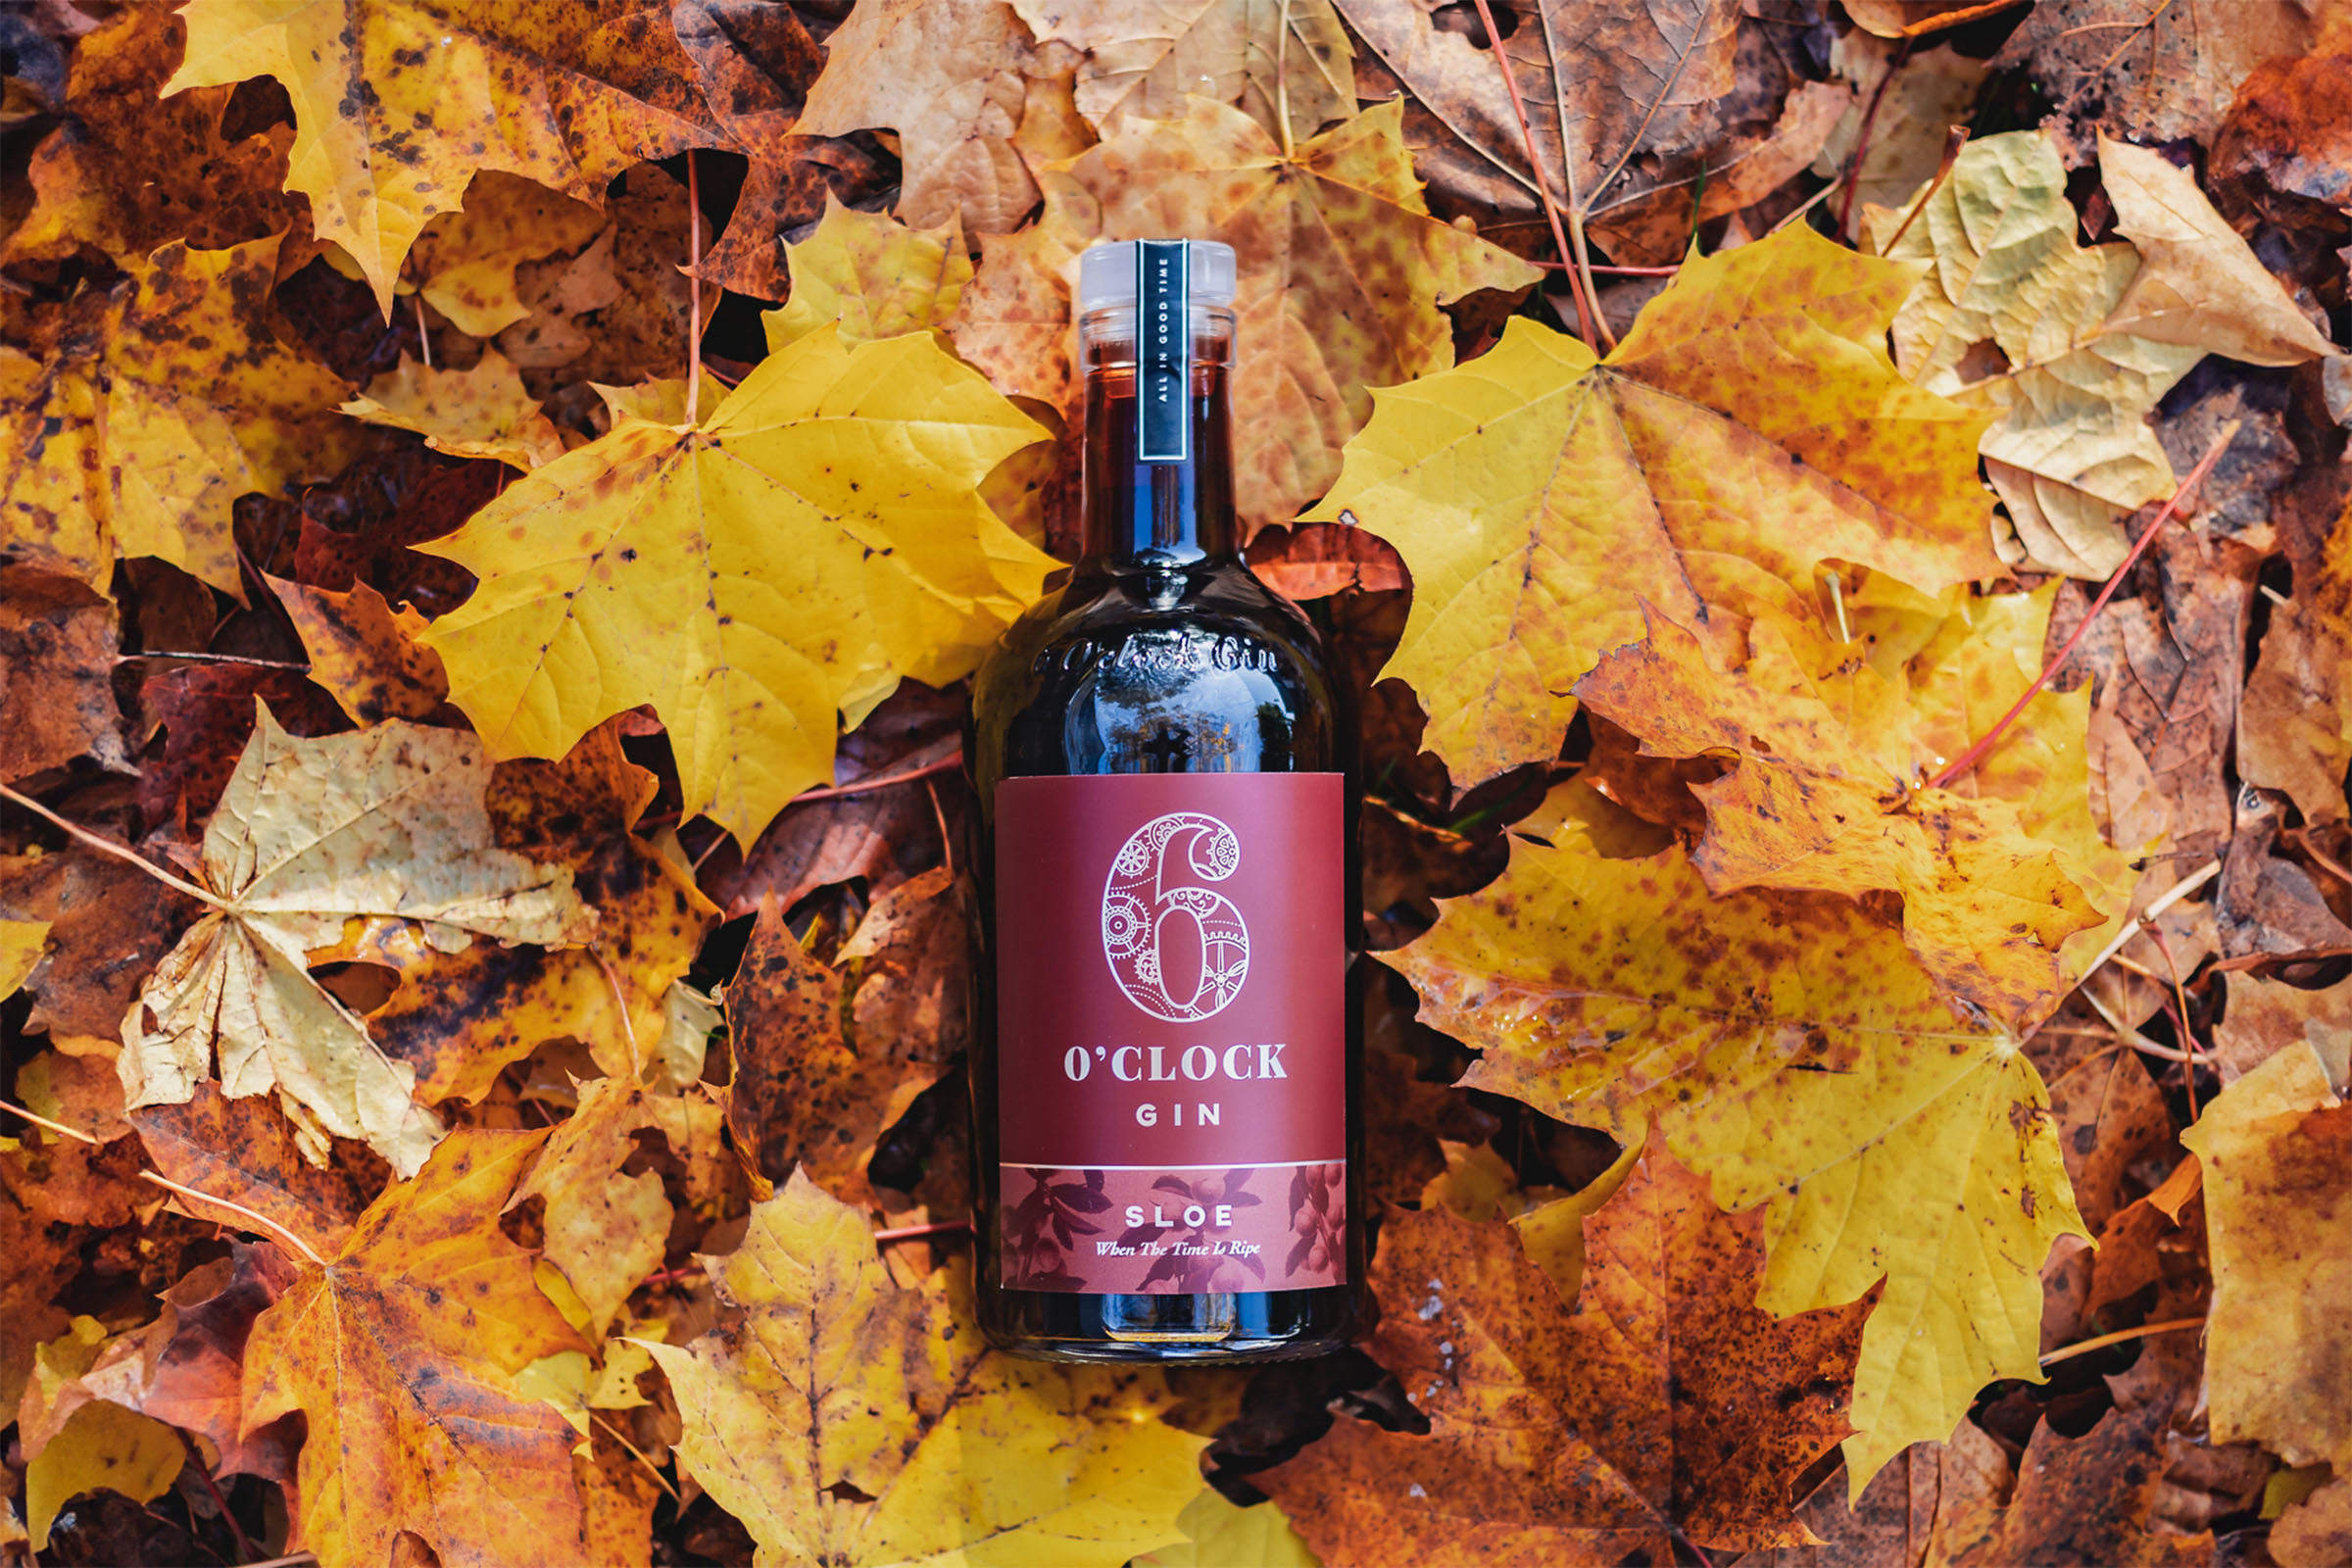 6 O'clock Sloe Gin Bottle in Autumn Leaves. A Timeless Classic